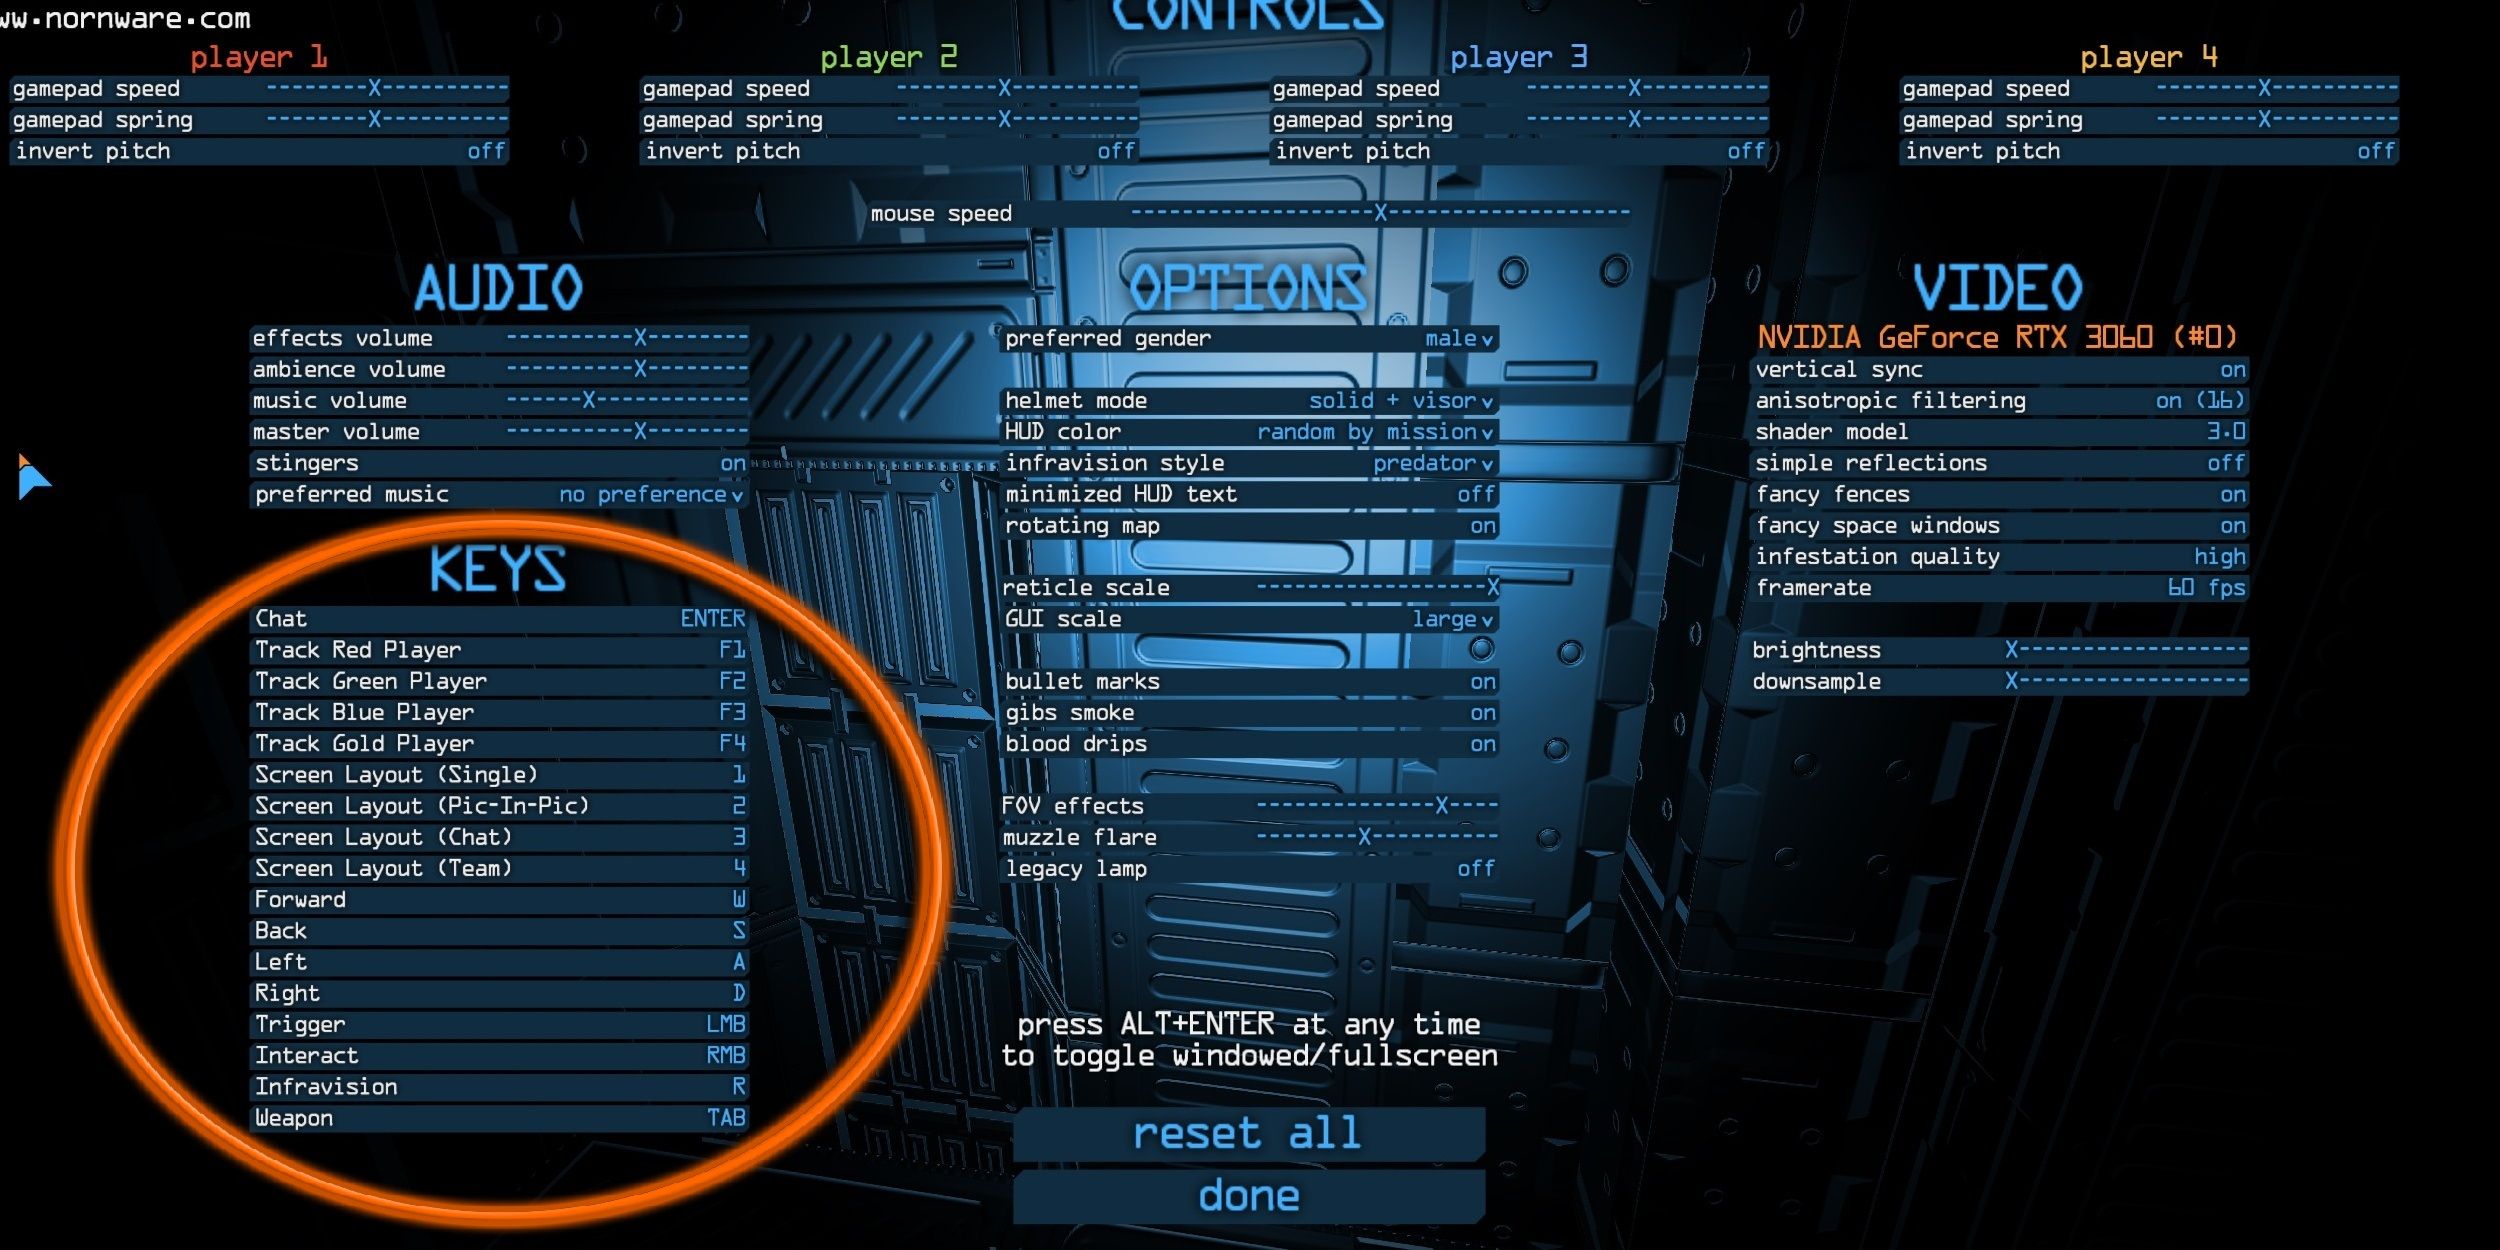 The settings menu in the game, the Keys are highlighted because this is the only place that their functionality is revealed.